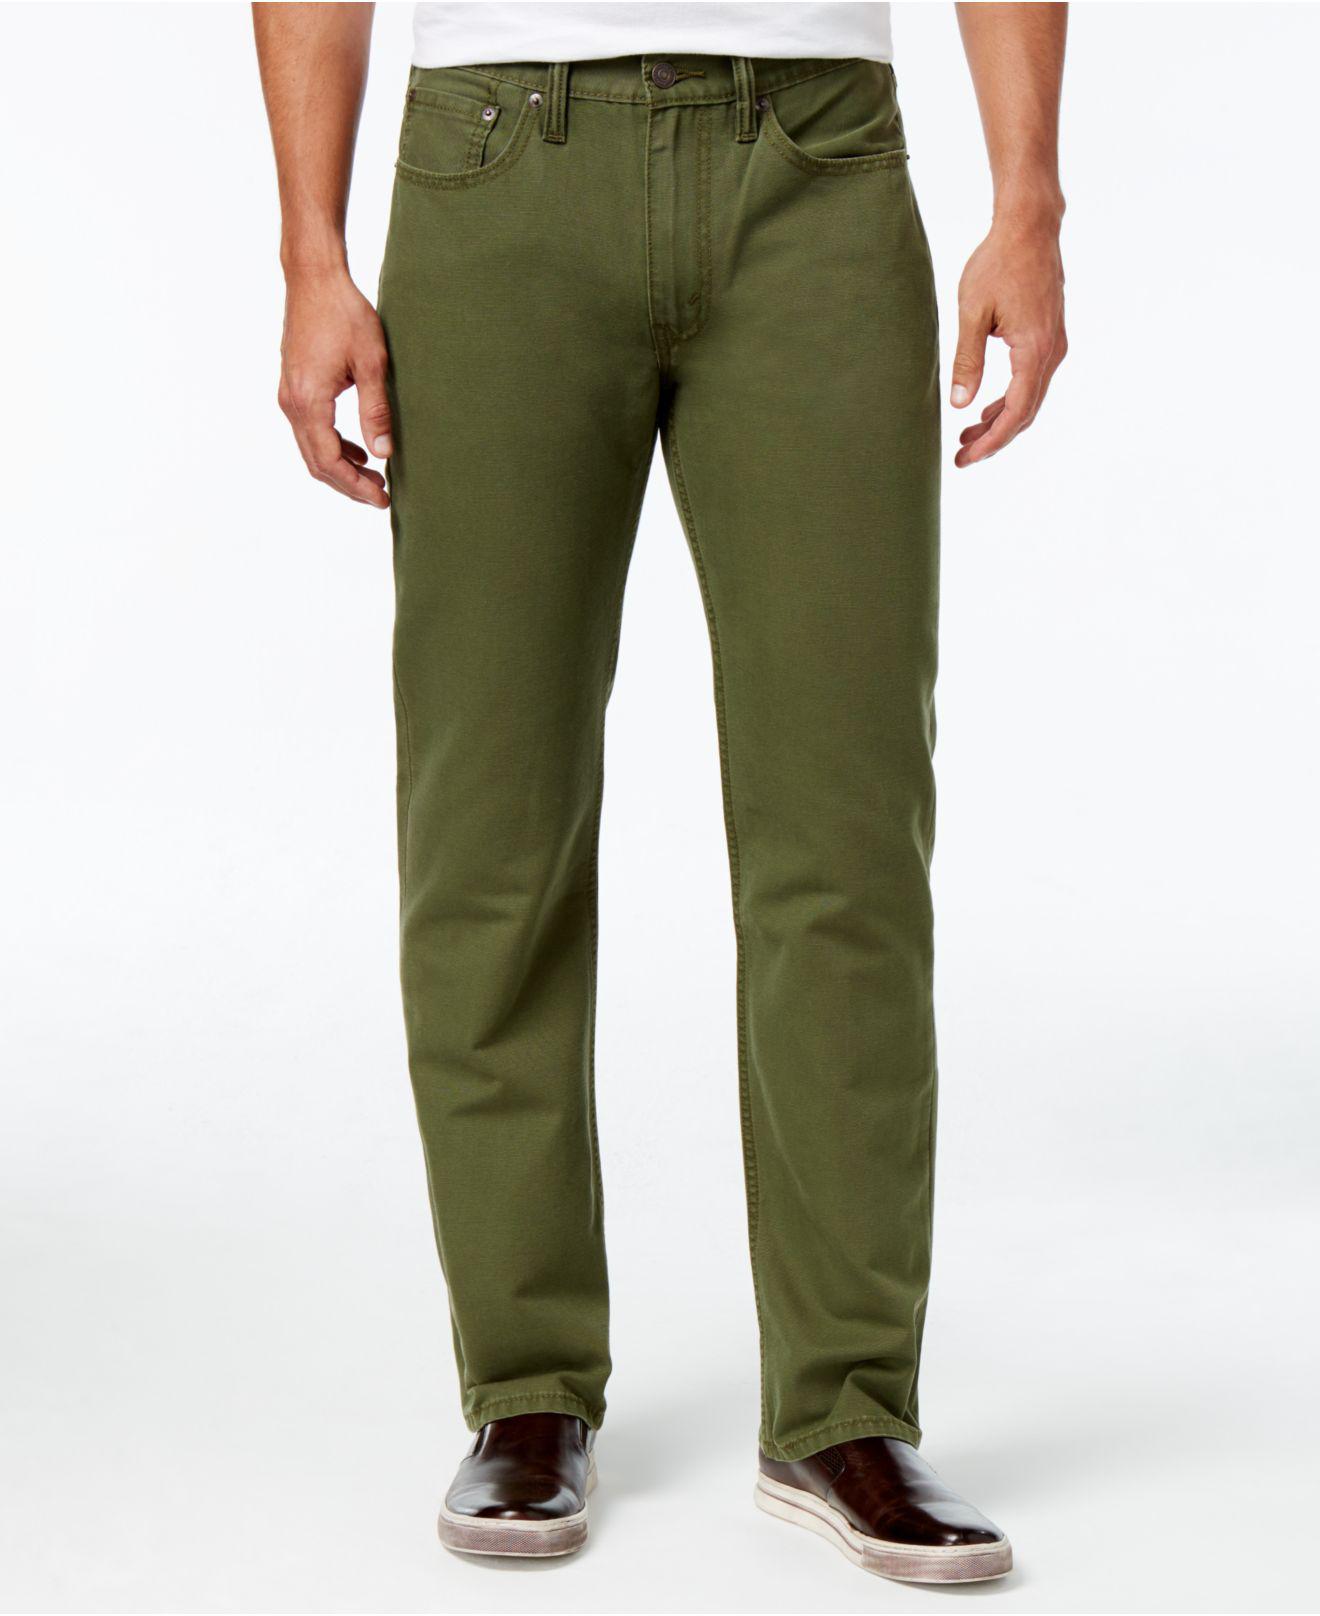 Levi's 514 Straight Fit Padox Canvas Twill Pants in Green for Men - Lyst